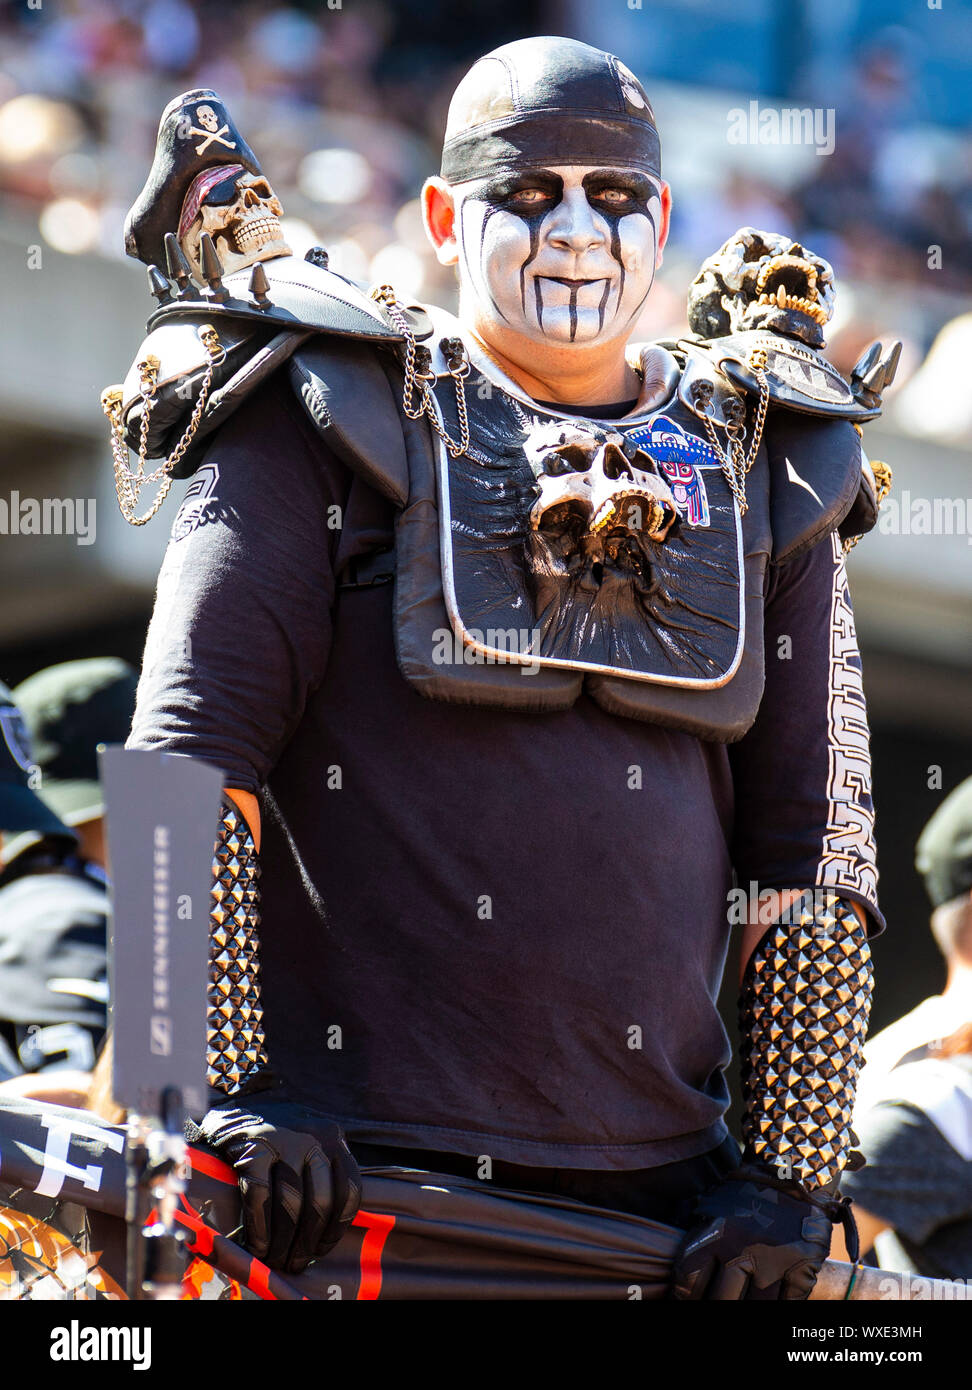 RingCentral Coliseum Oakland Calif, USA. 15th Sep, 2019. U.S.A Oakland Raiders fans during the NFL football game between Kansas City Chiefs and the Oakland Raiders 10-28 lost at RingCentral Coliseum Oakland Calif. Thurman James/CSM/Alamy Live News Stock Photo